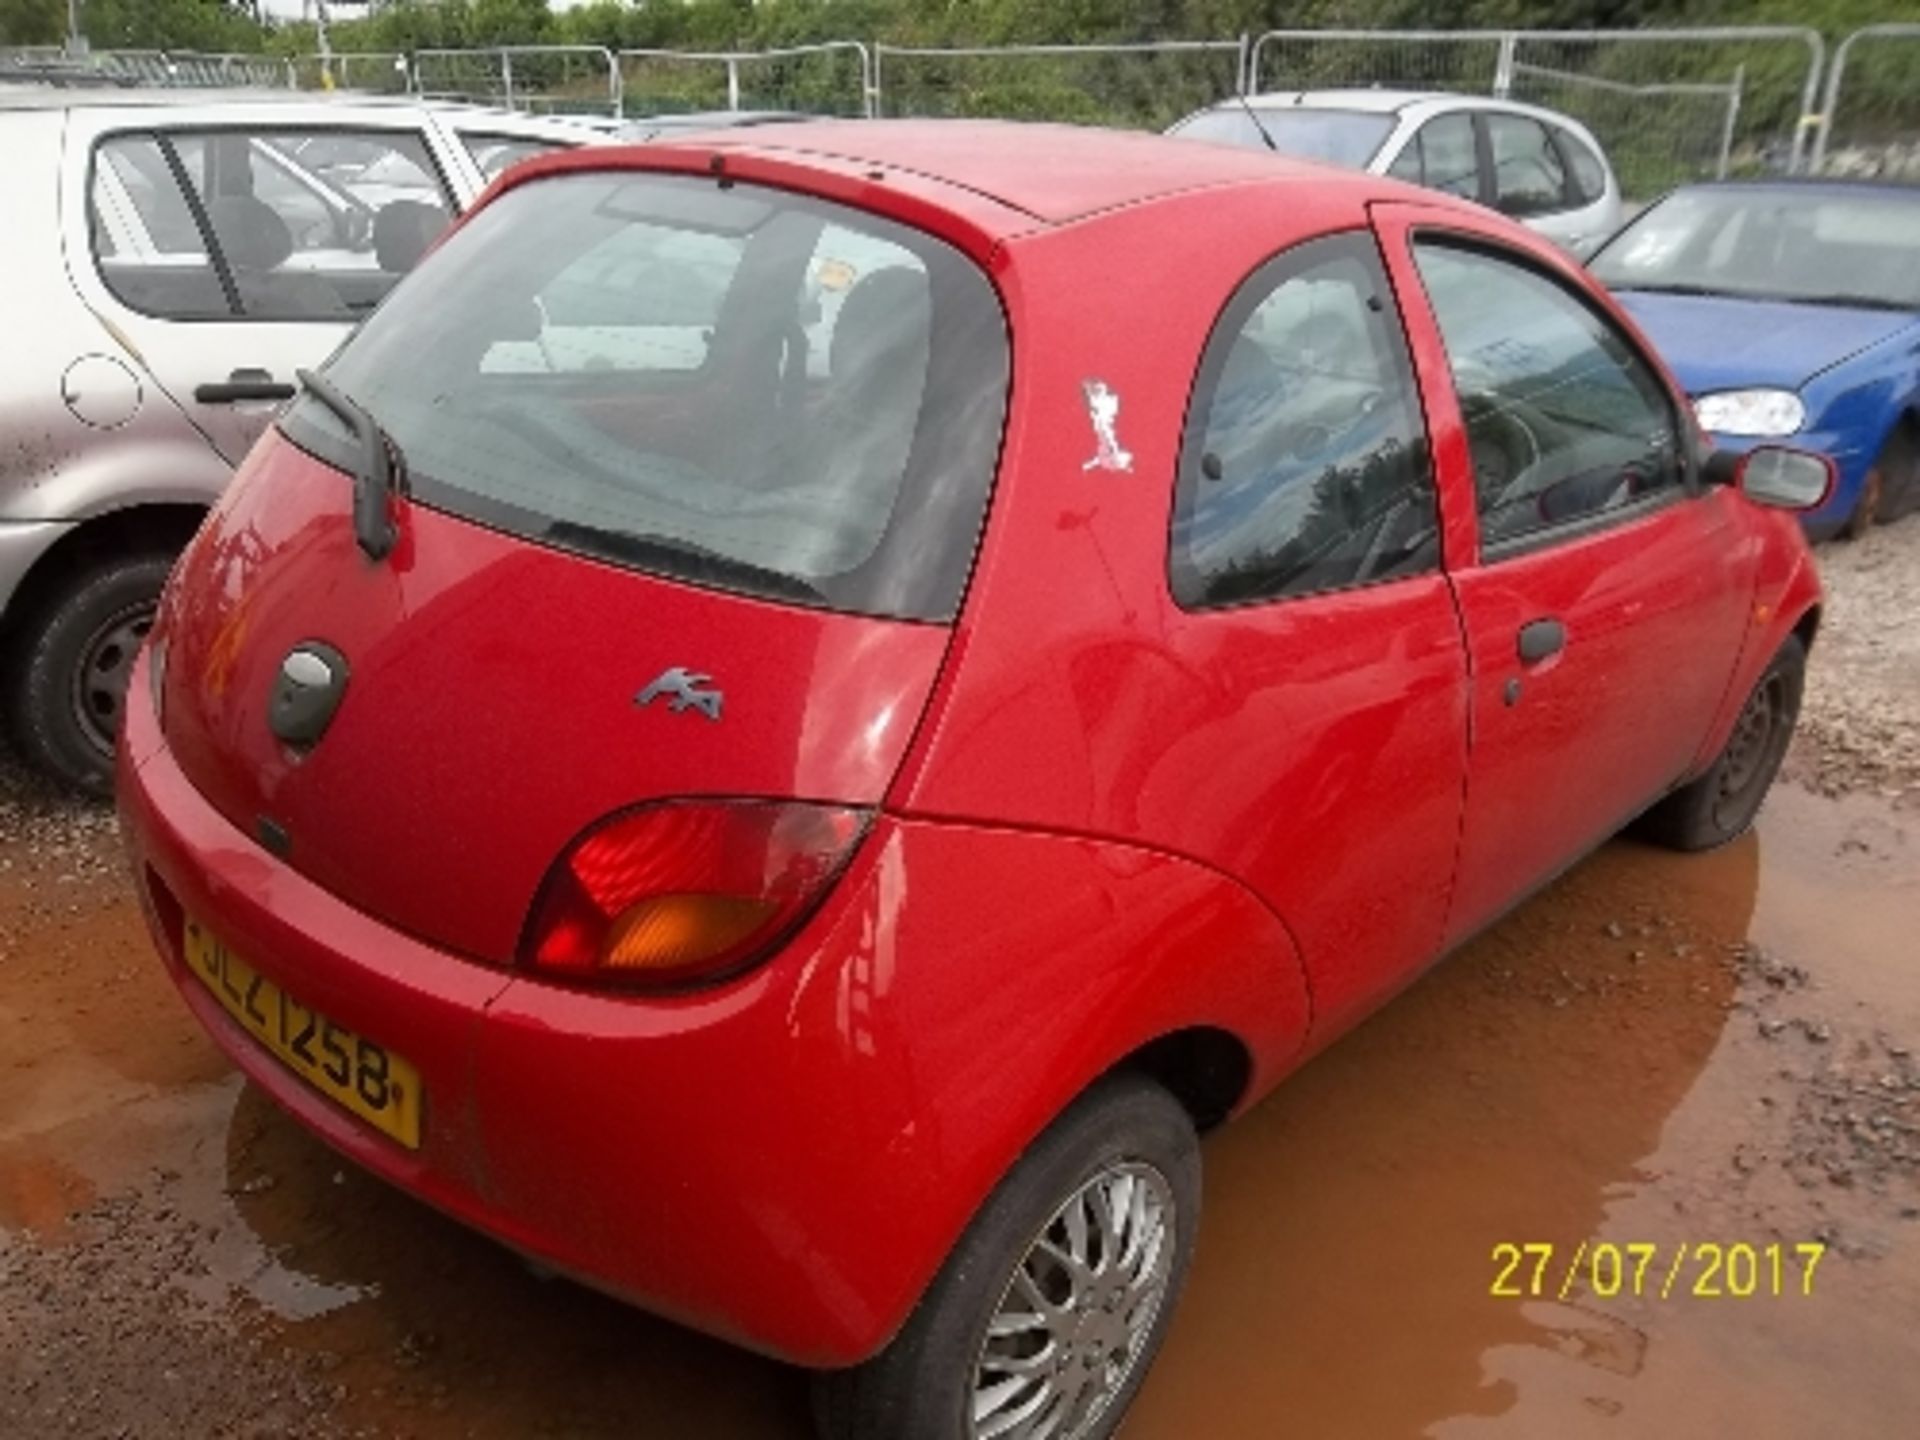 Ford KA Style - JLZ 1258 Date of first registration in UK: 27.09.2002 (previously registered - Image 3 of 4